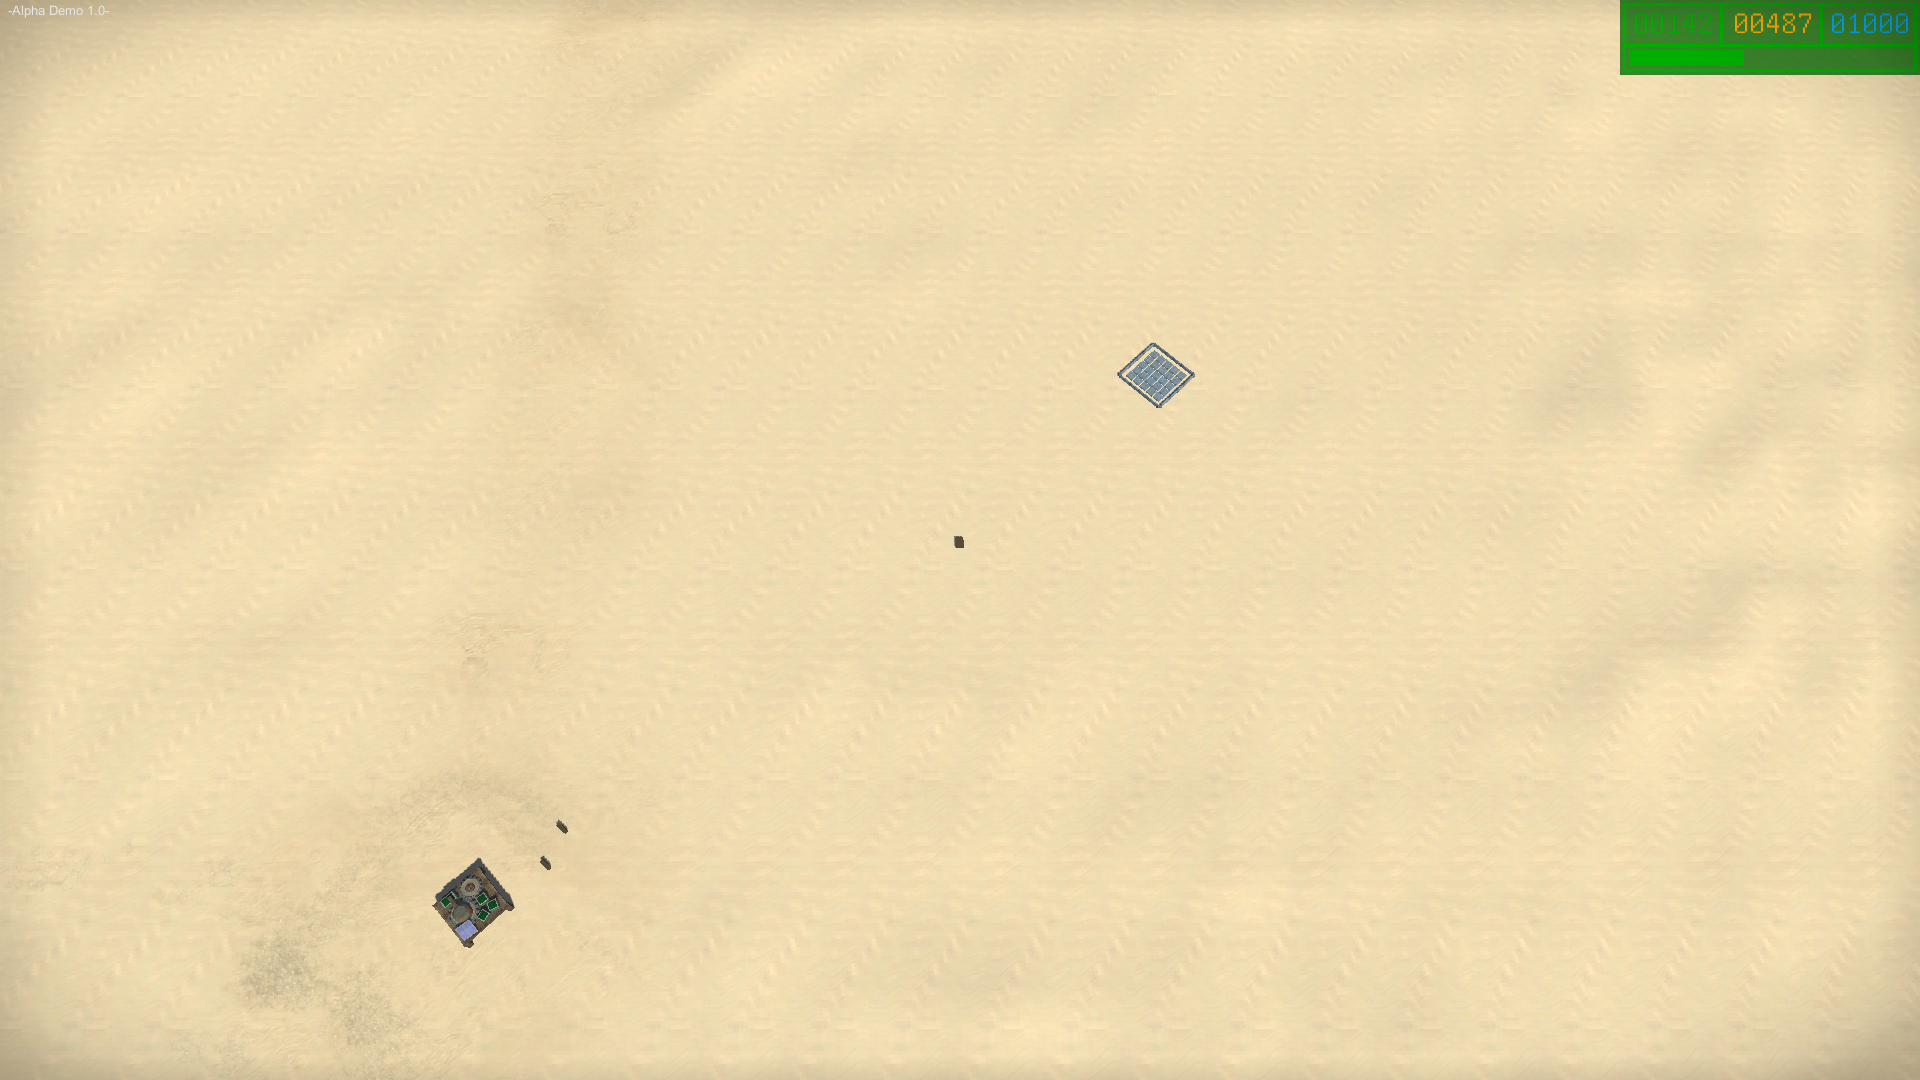 This is the player’s base (right) near a guarded mining base (left)